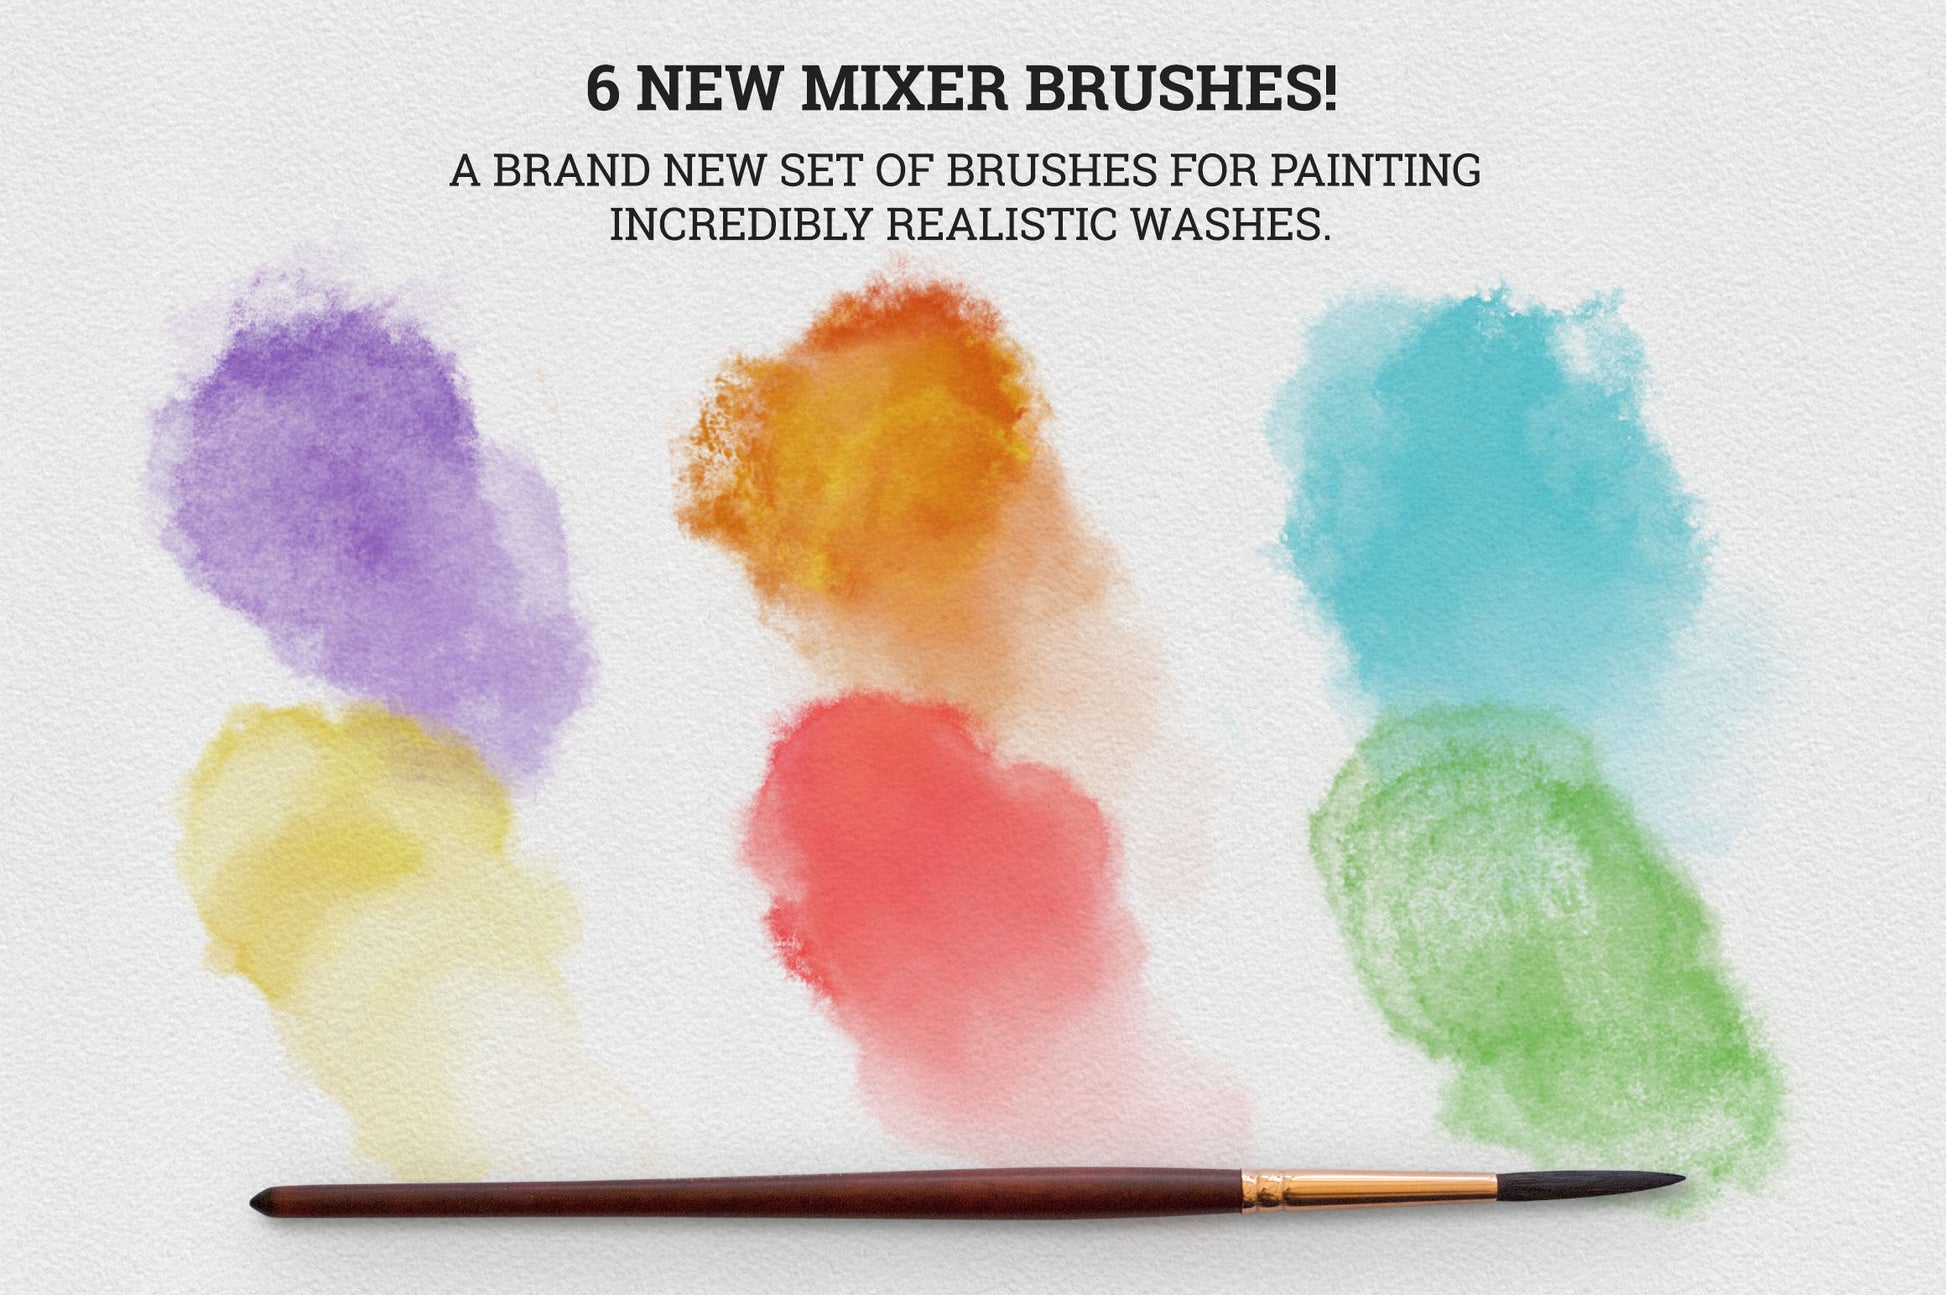 Best Watercolour Brushes - The Ultimate Guide